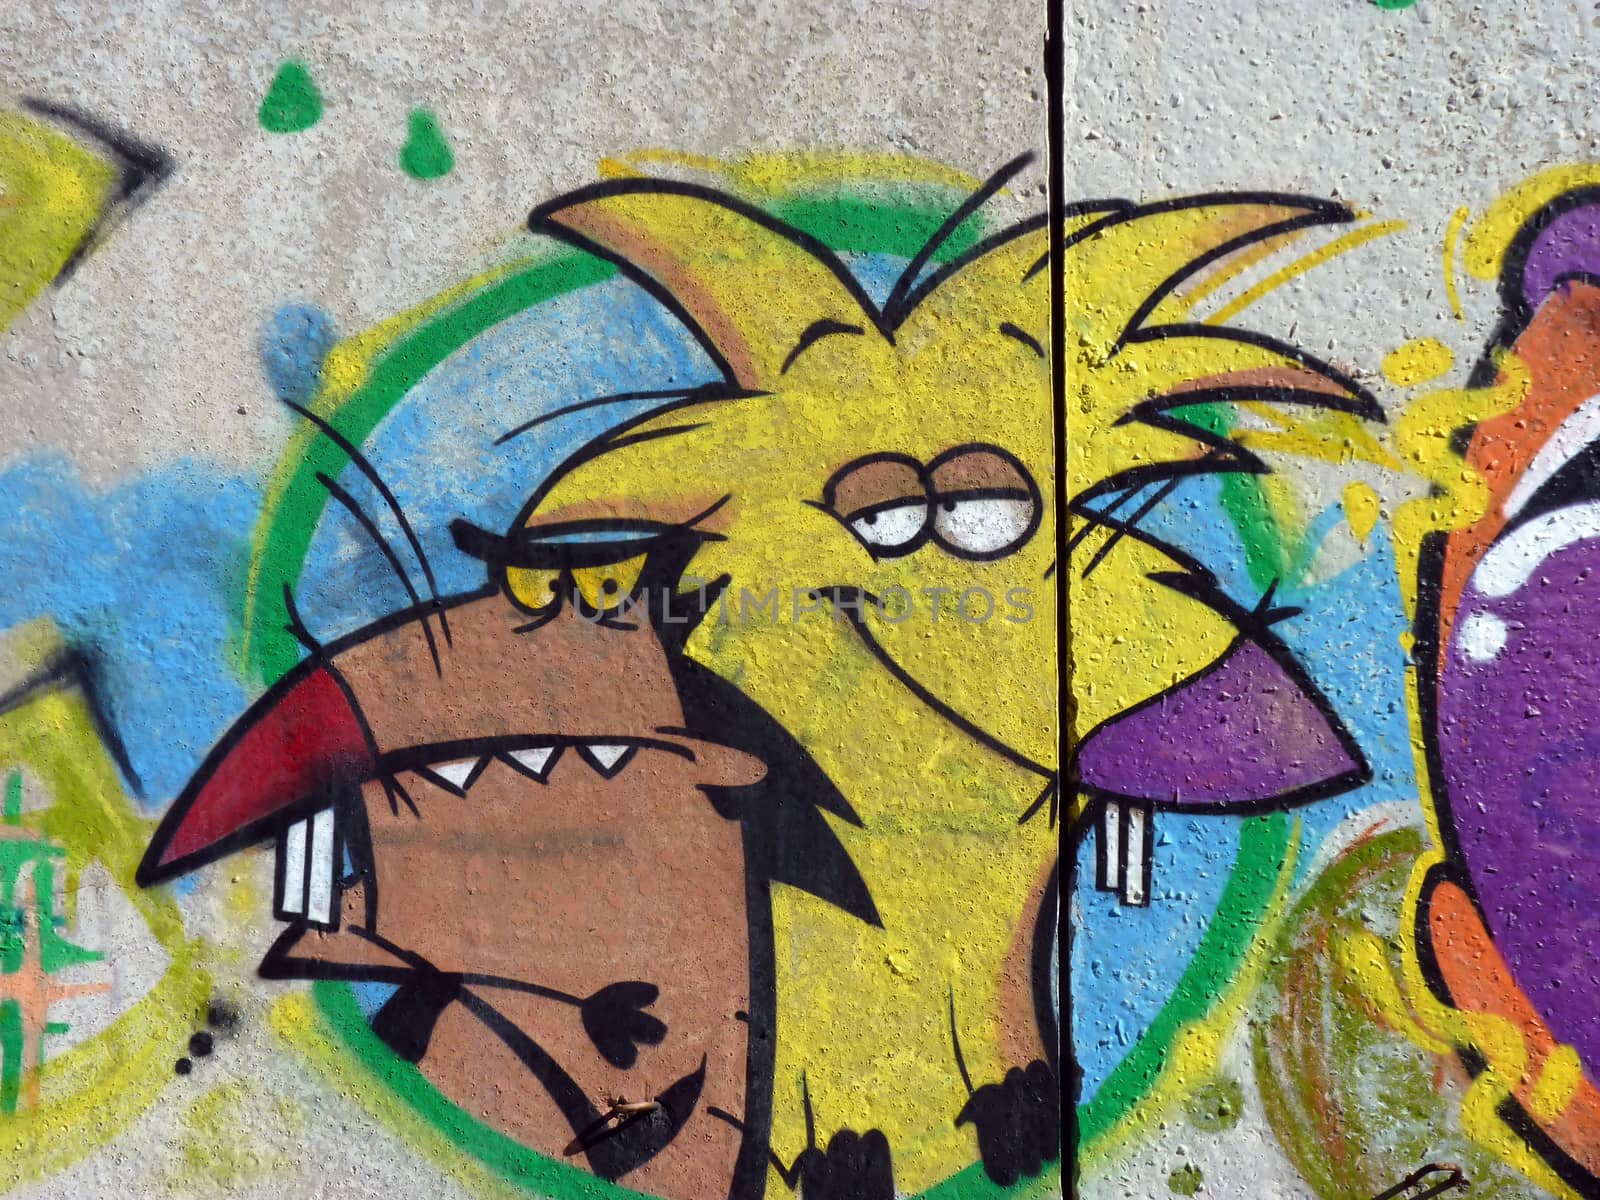 Graffiti cheerful rodents on a concrete wall in the city of Volgograd